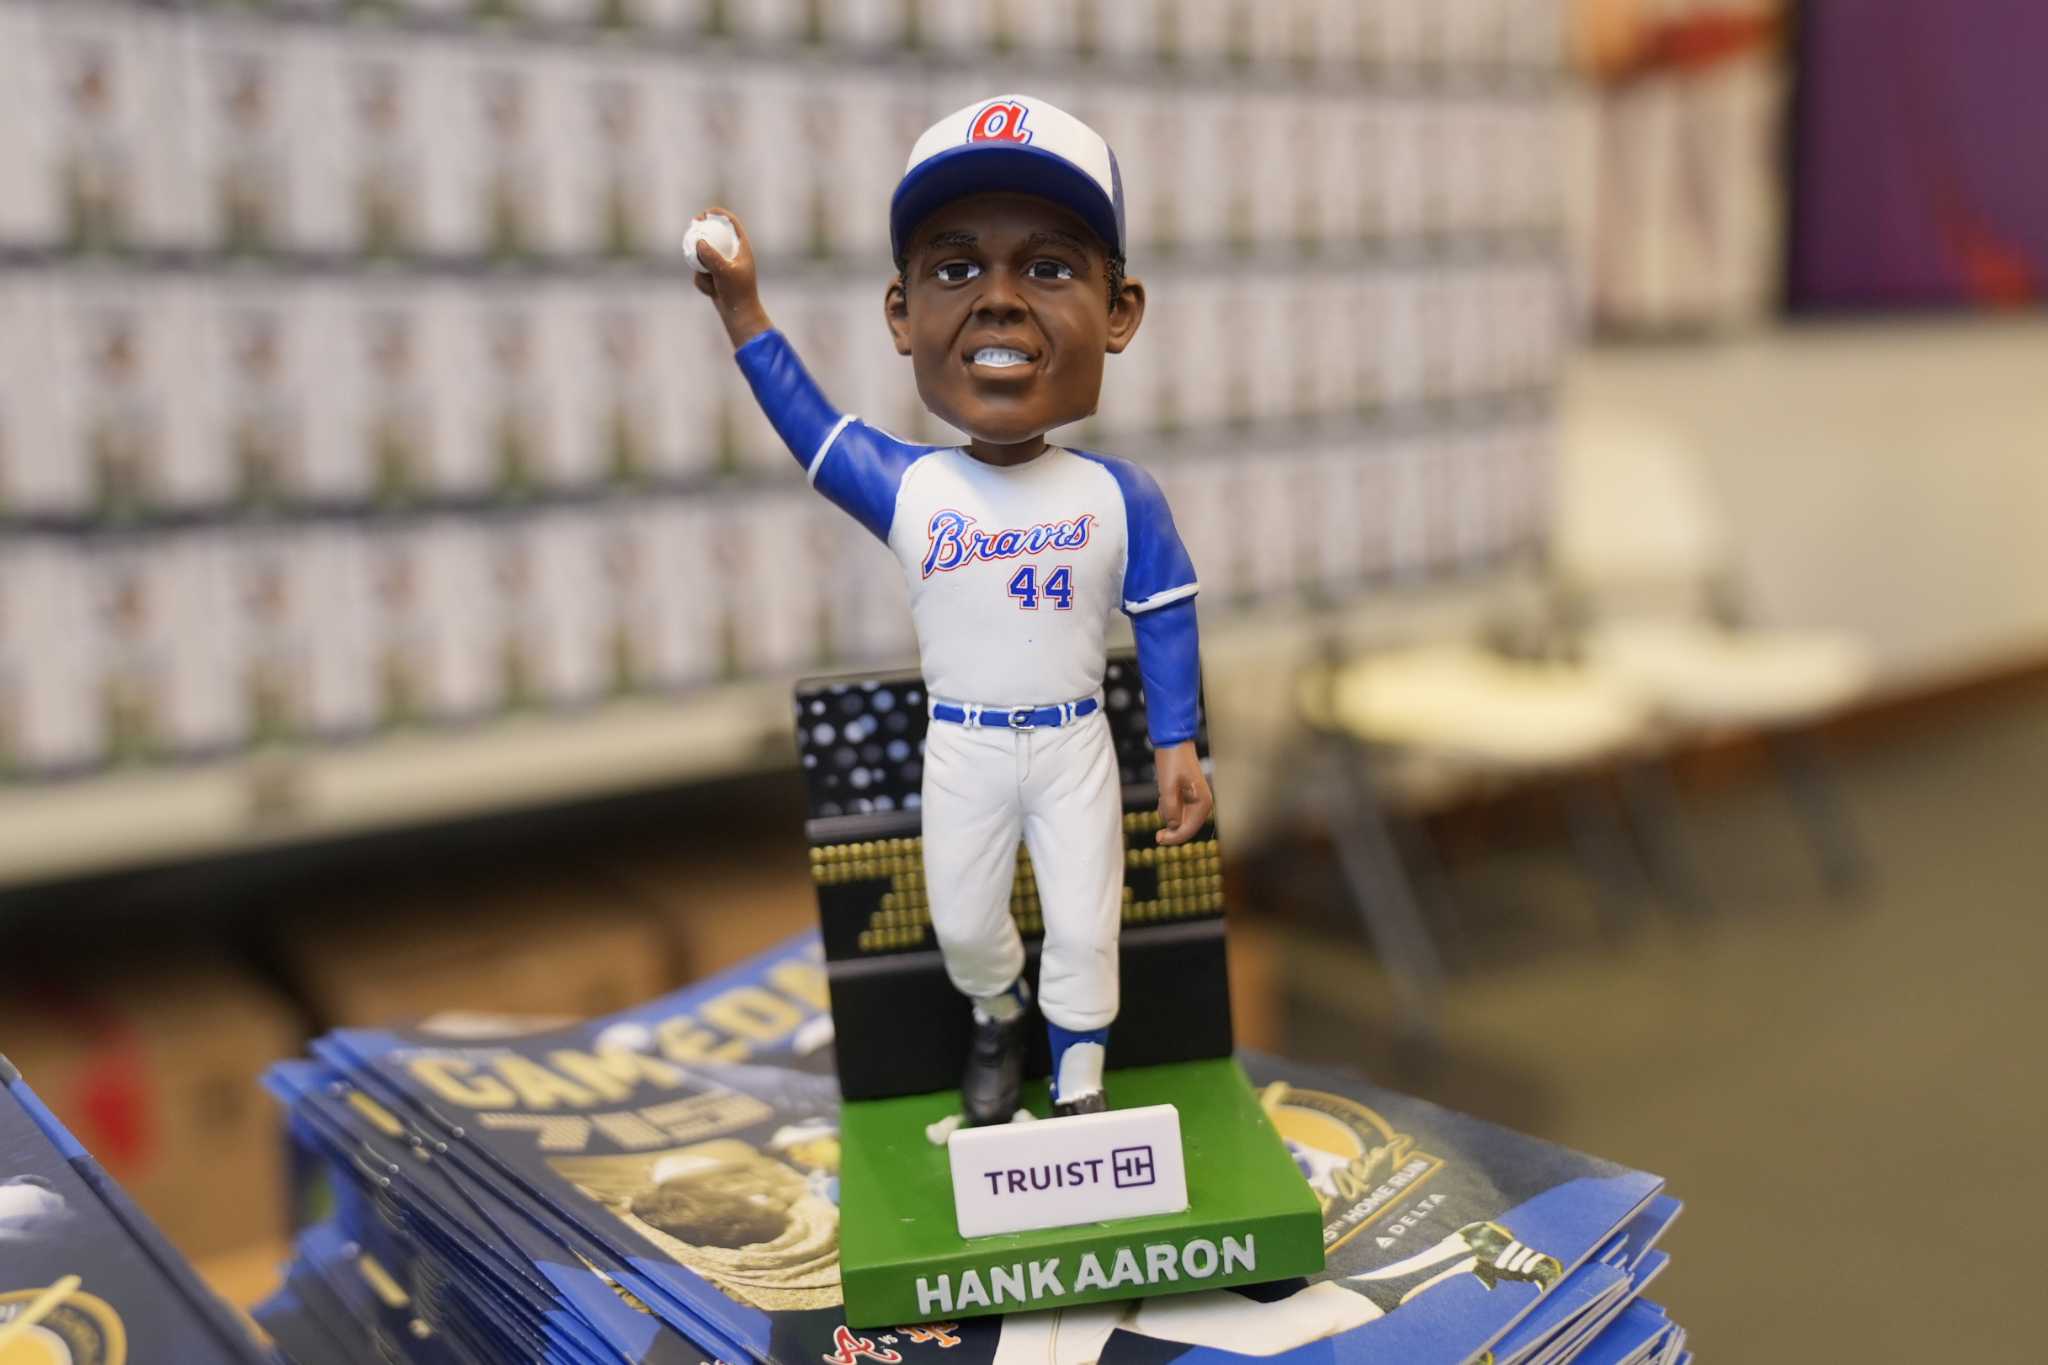 50 years after Hank Aaron's 715th homer, Hall of Fame announces statue ...